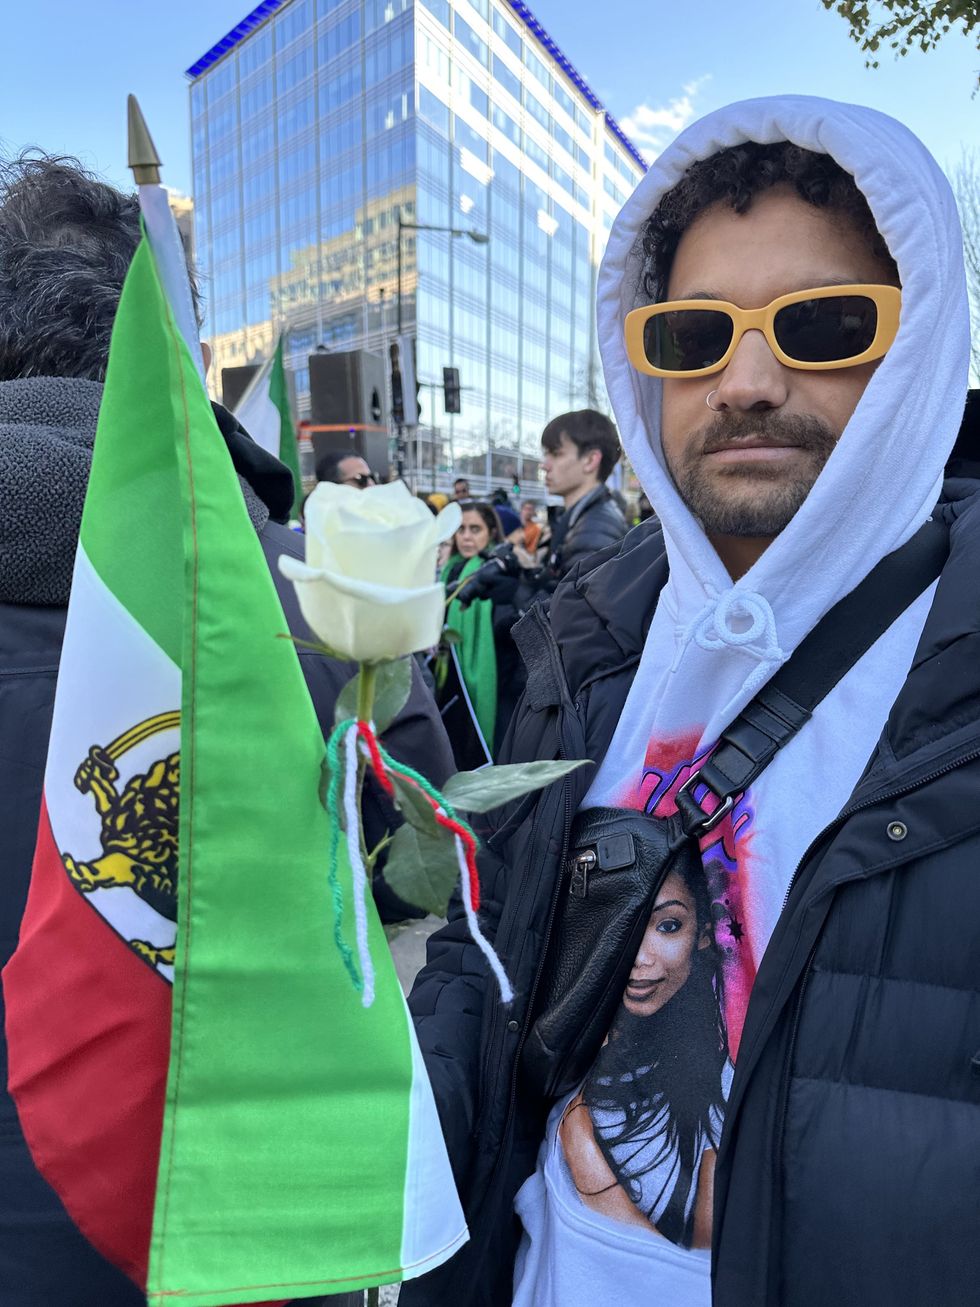 man at protest with iranian flag